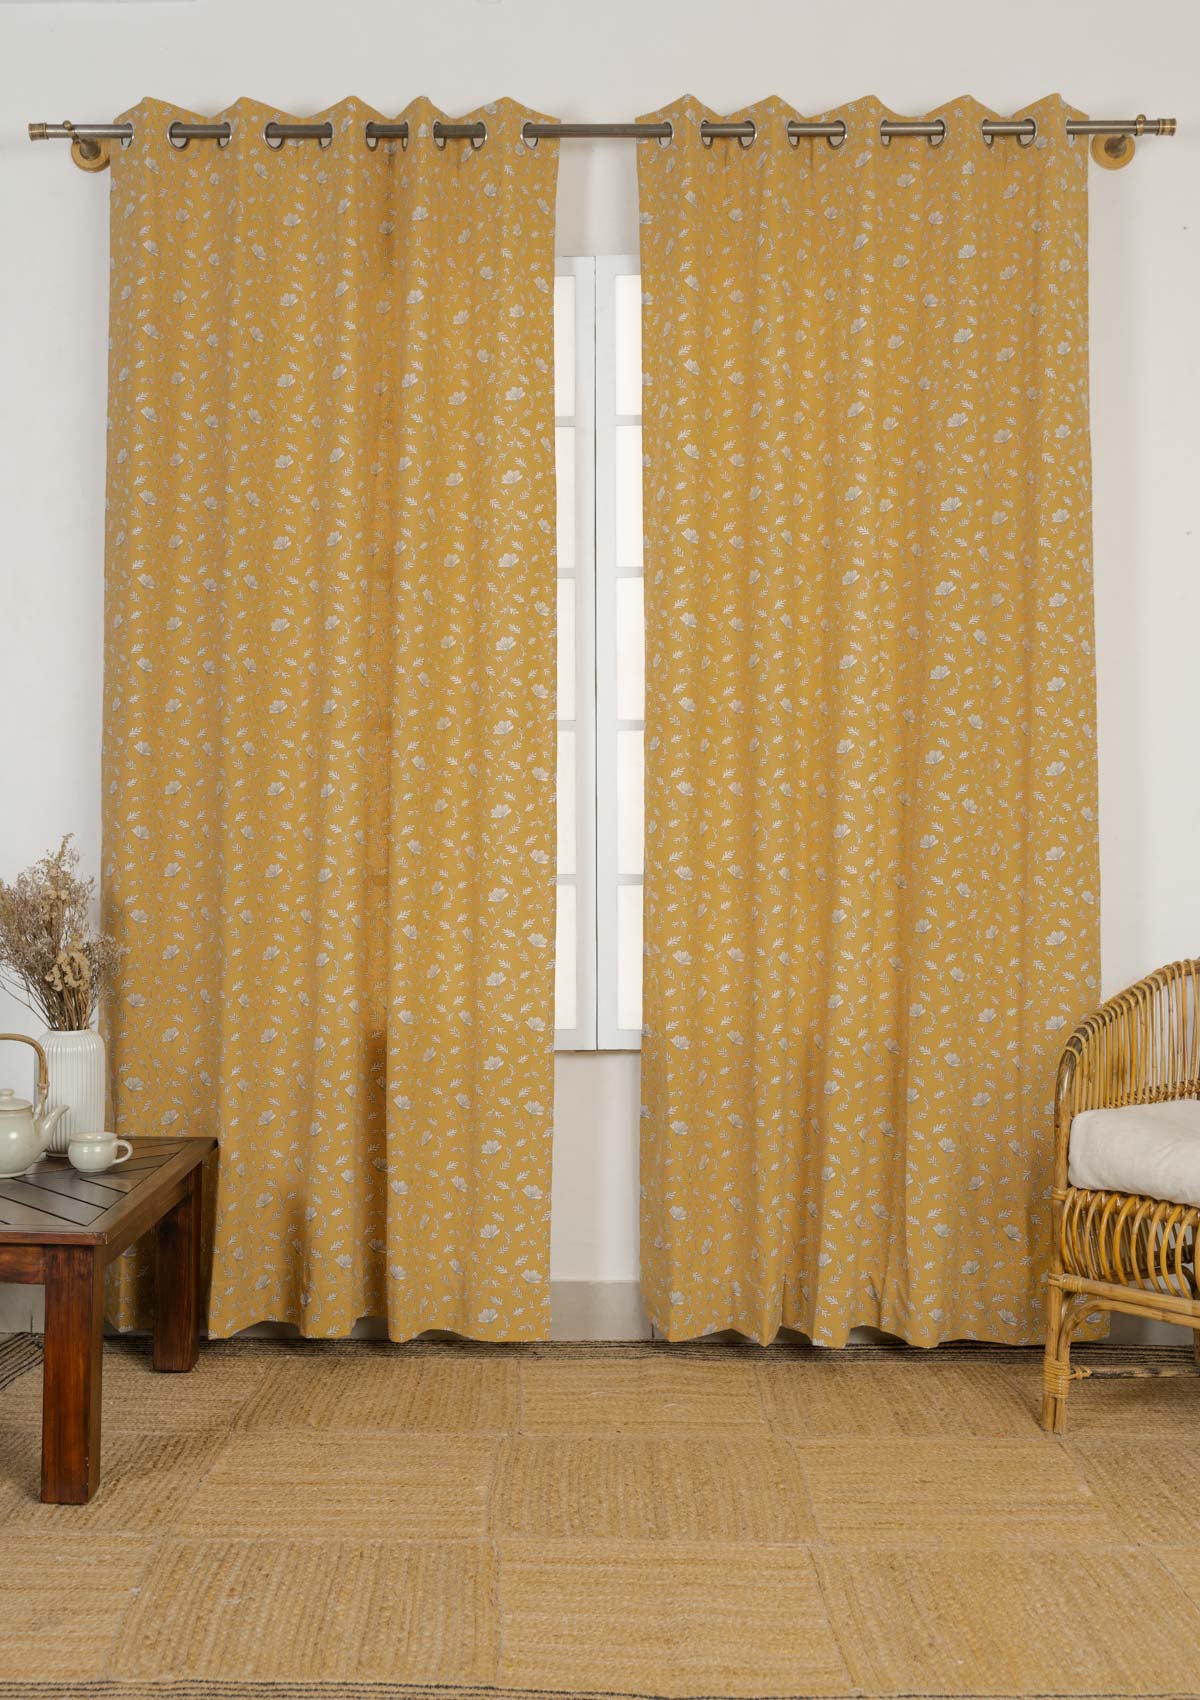 Eden mustard 100% cotton floral curtain for bed room - Room darkening - Single - Pack of 1